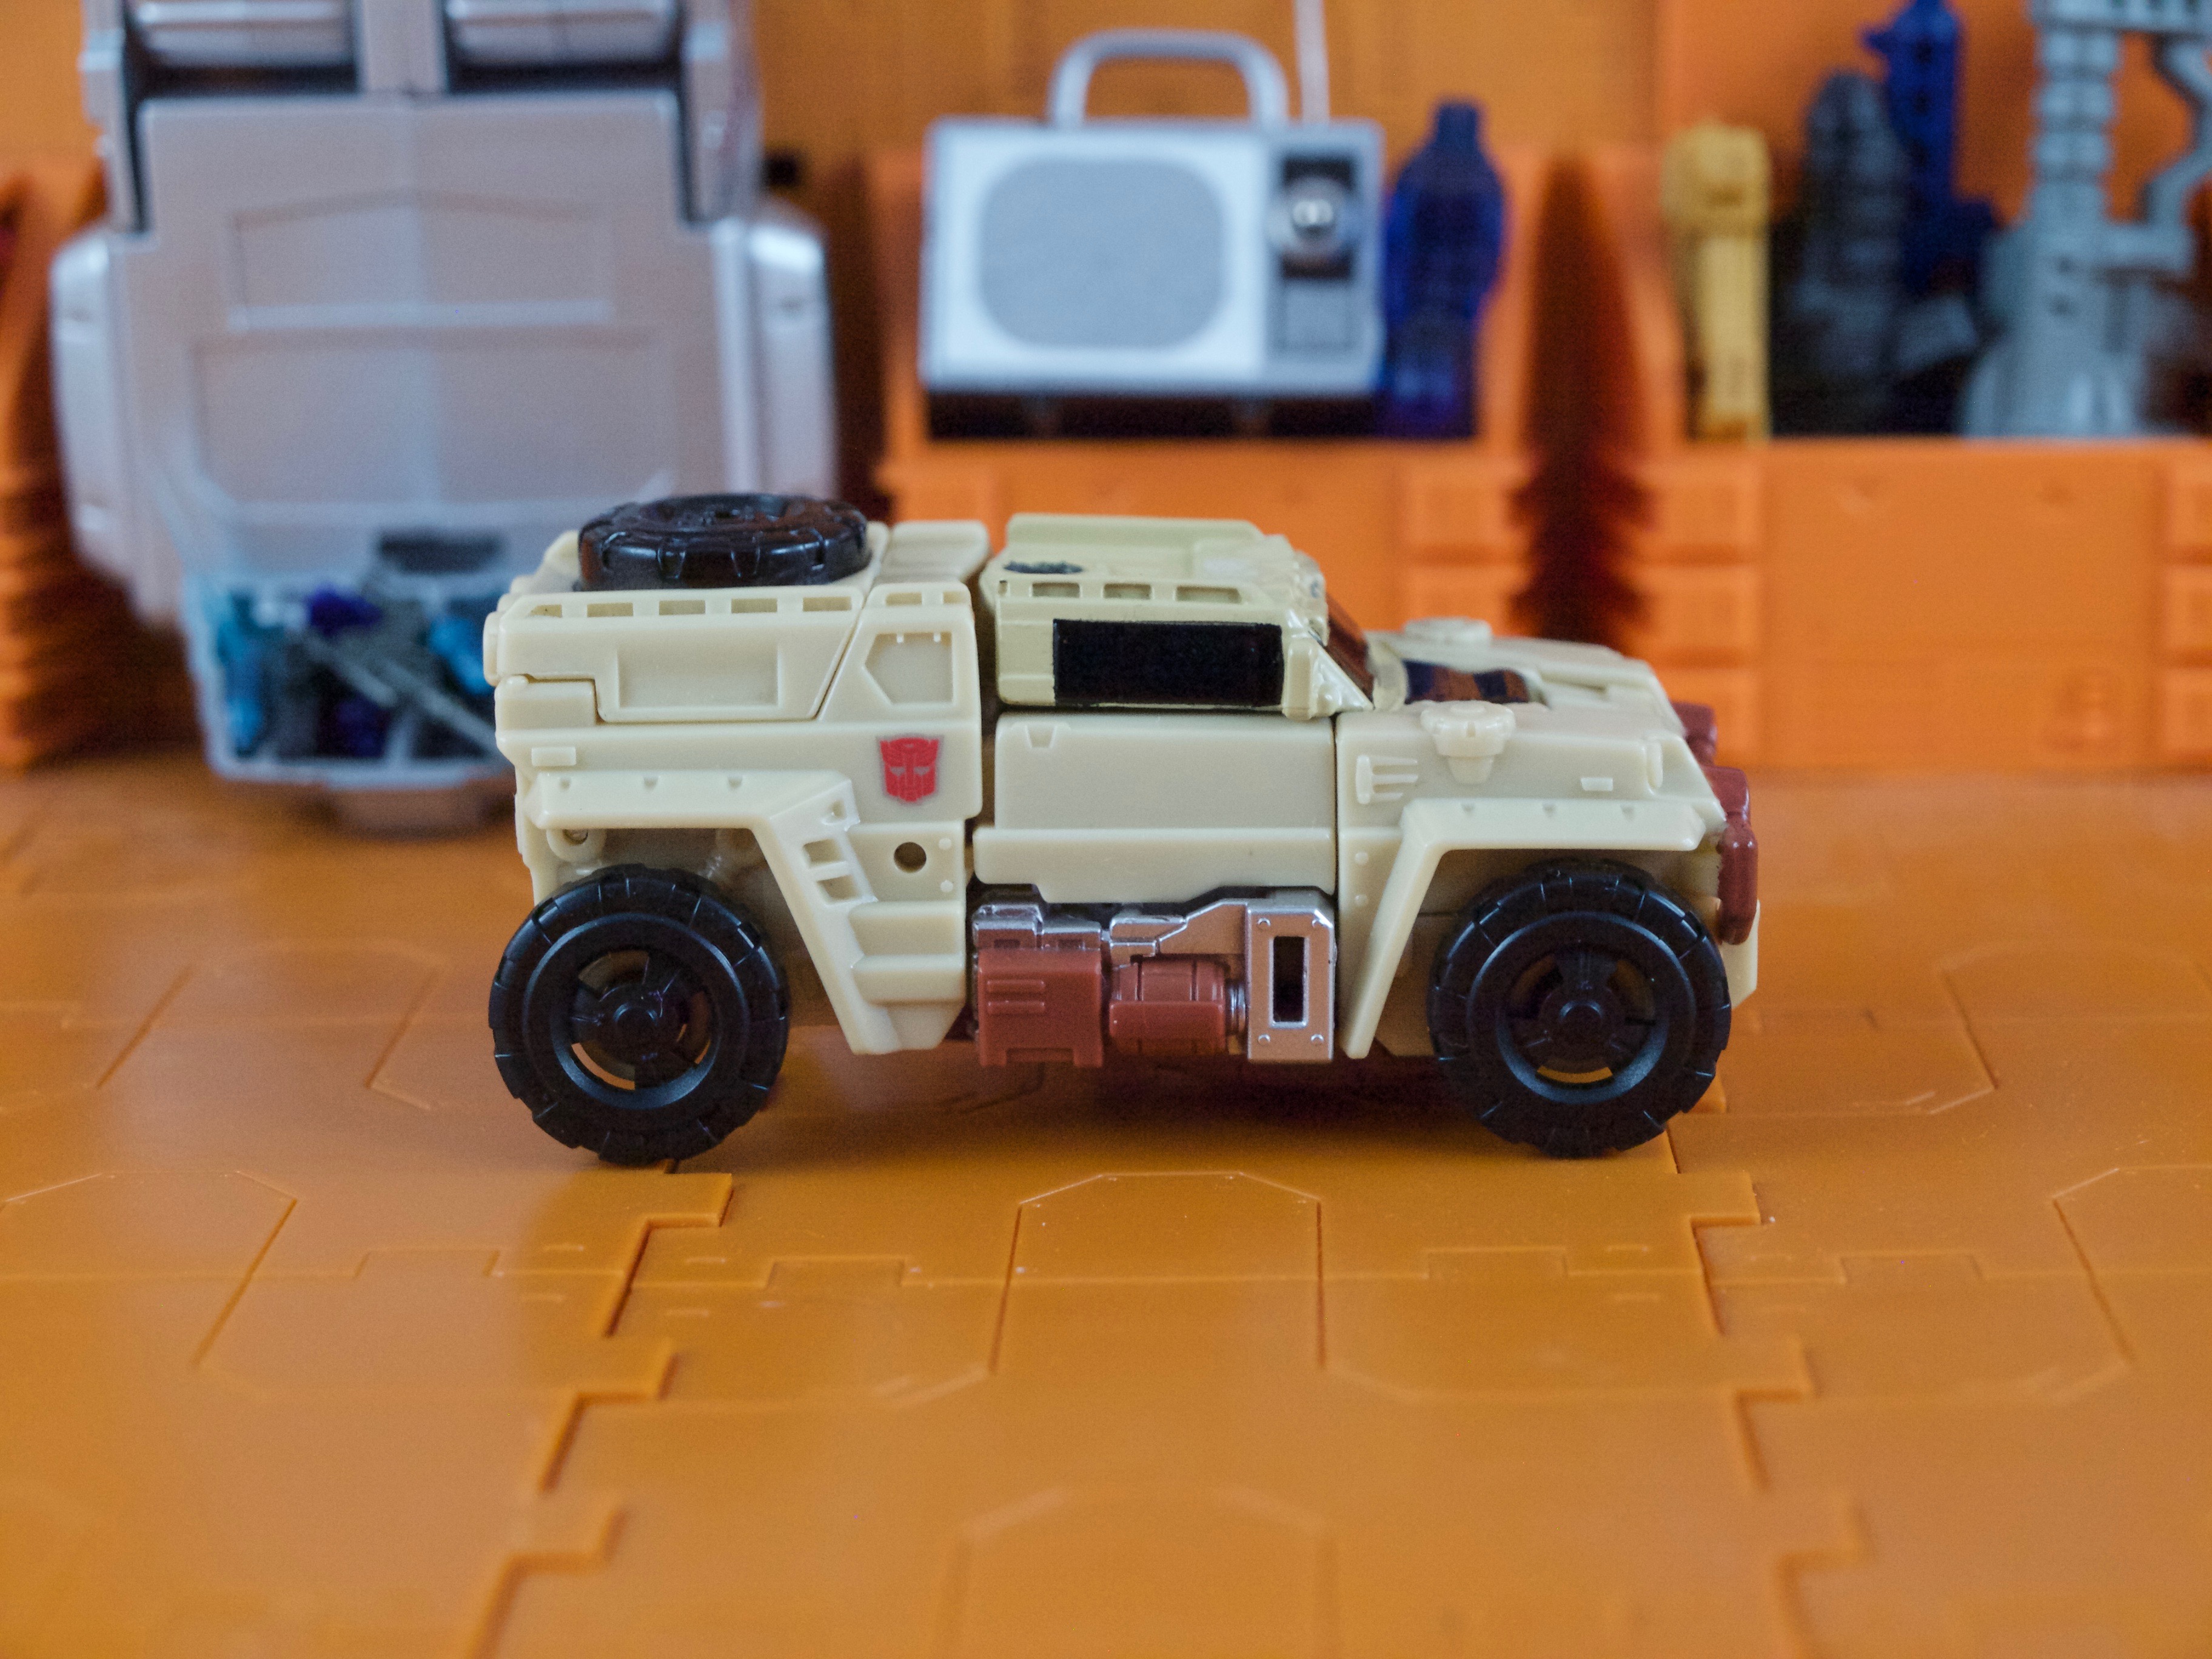 Outback vehicle mode side view